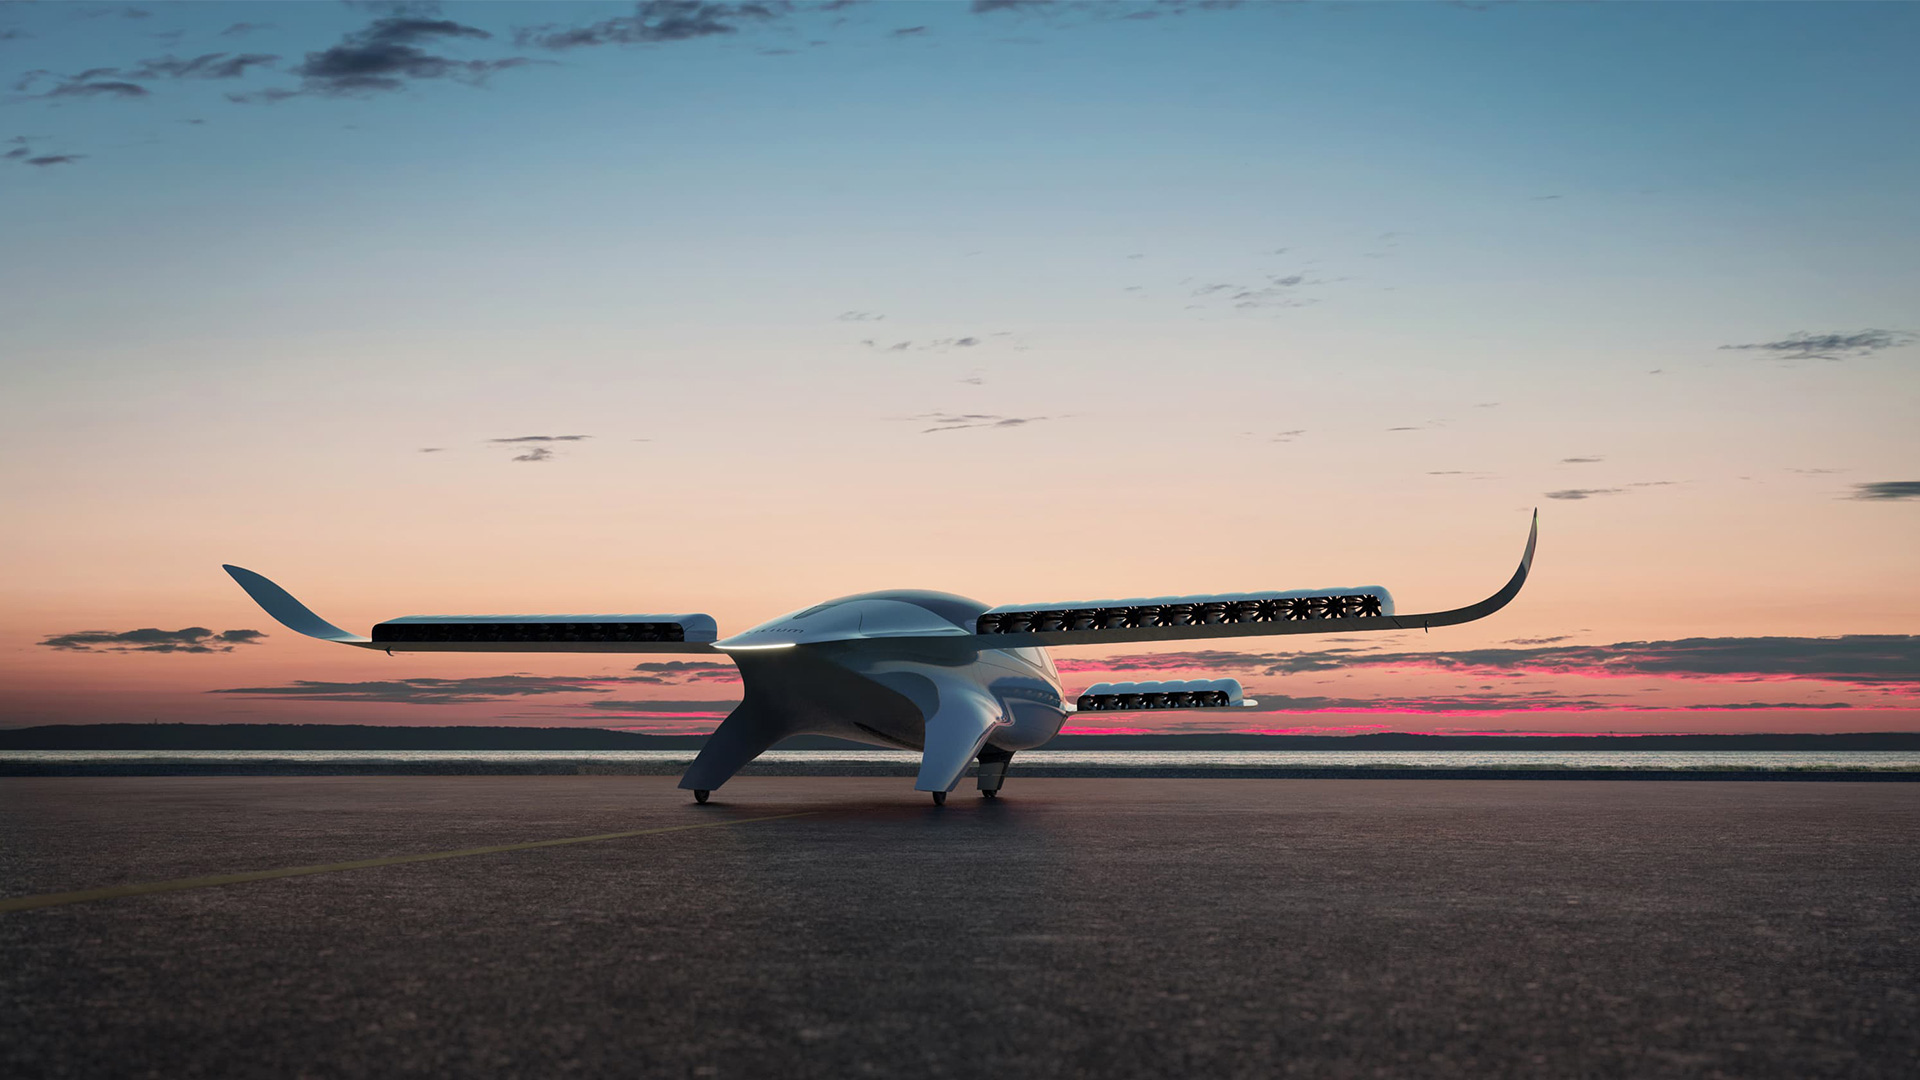 A render from the rear of the 7-seat Lilium Jet in sunset